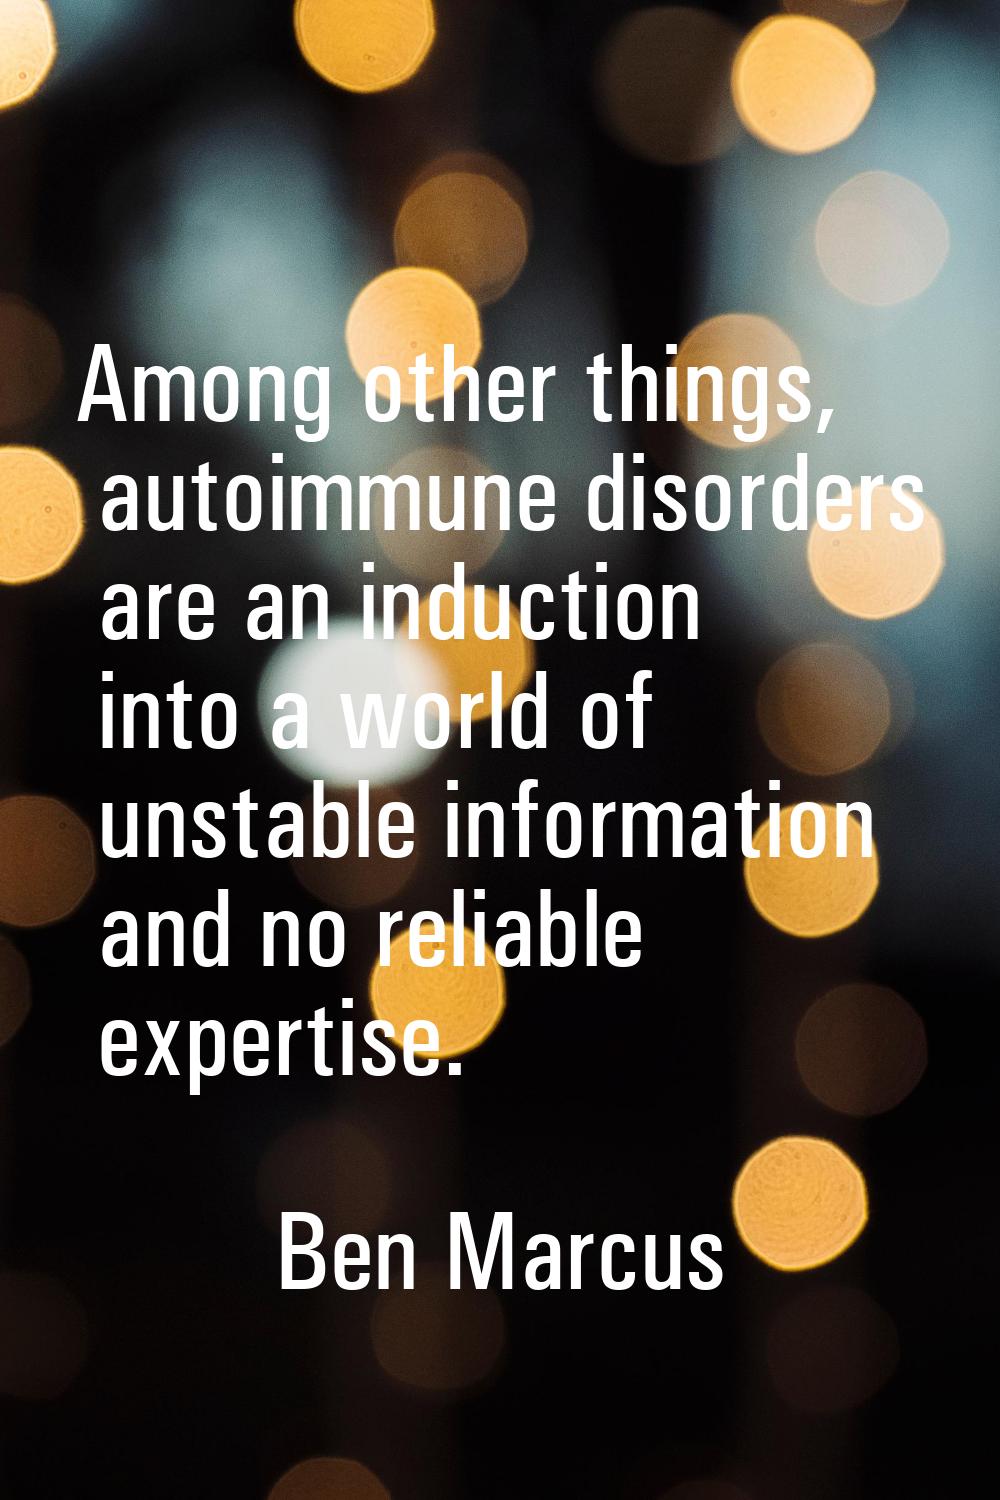 Among other things, autoimmune disorders are an induction into a world of unstable information and 